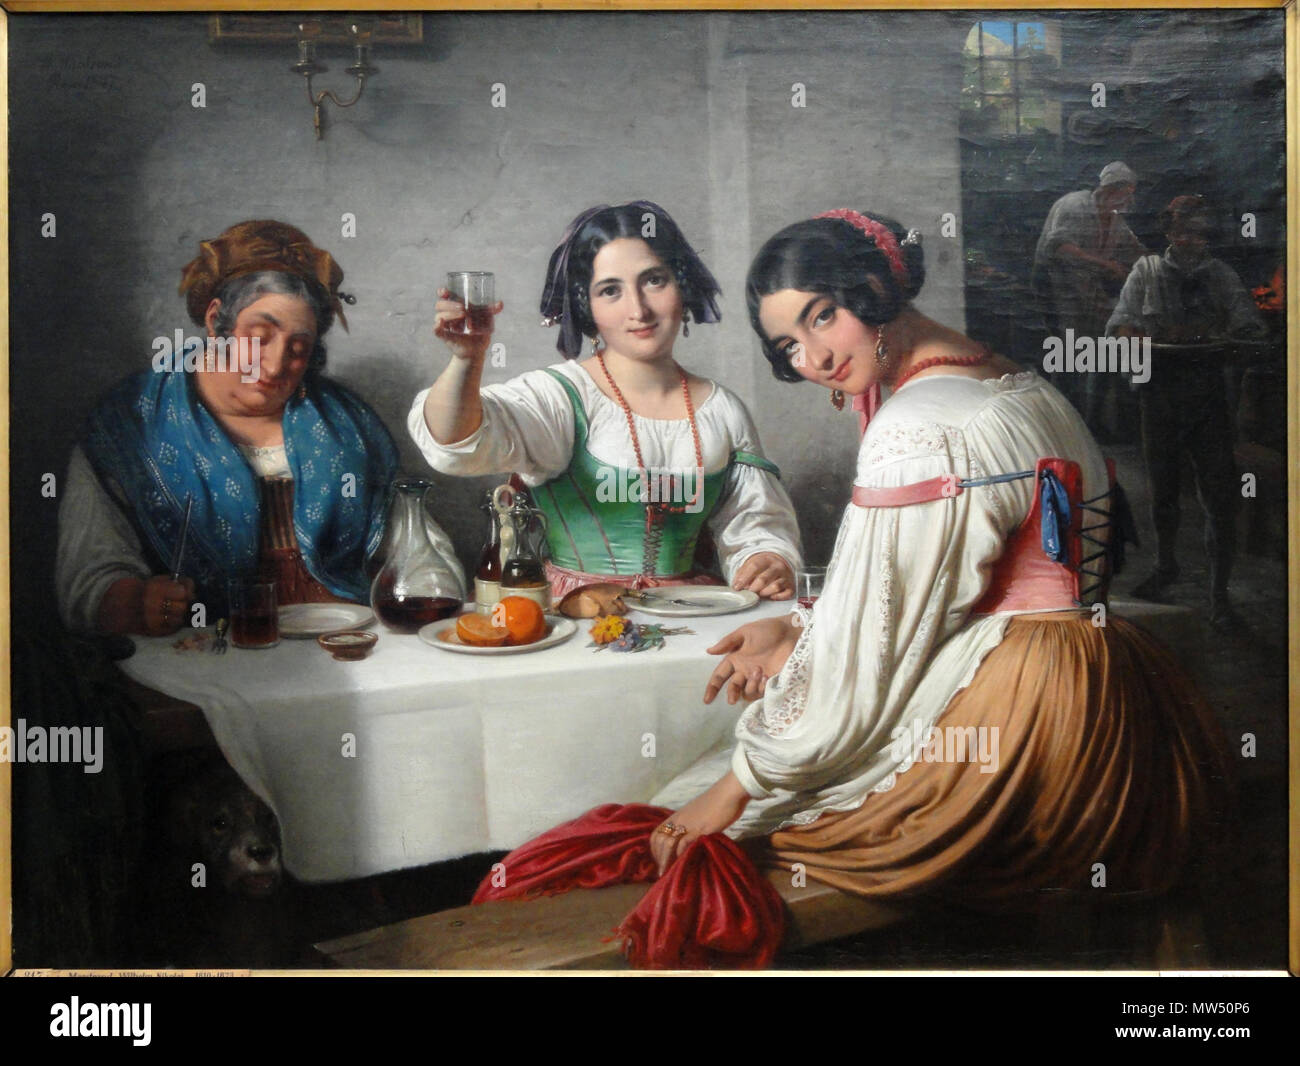 . Italian Osteria Scene, Girl welcoming a Person entering . Painting exhibited in the Ny Carlsberg Glyptotek, Dantes Plads 7, Copenhagen, Denmark. This artwork is now in the public domain because the artist died more than 70 years ago. 1847 ; 2012-05-12 08:21:43. Daderot 301 Italian Osteria Scene, Girl welcoming a Person entering, by Wilhelm Marstrand - Ny Carlsberg Glyptotek - Copenhagen - DSC09271 Stock Photo